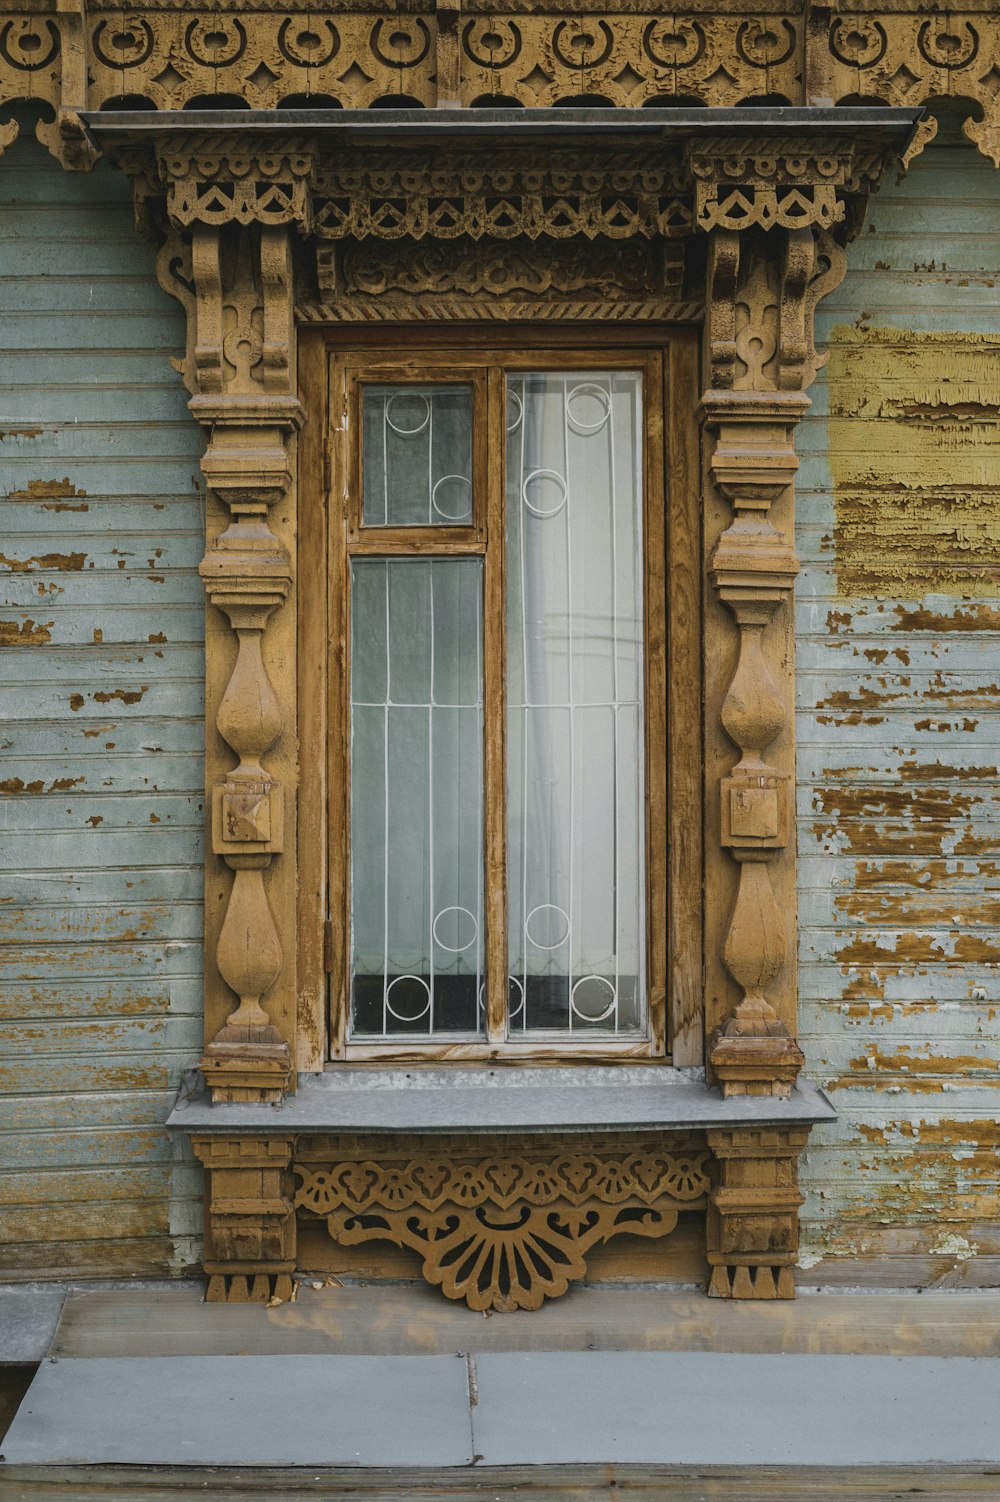 a wooden window on the side of a building